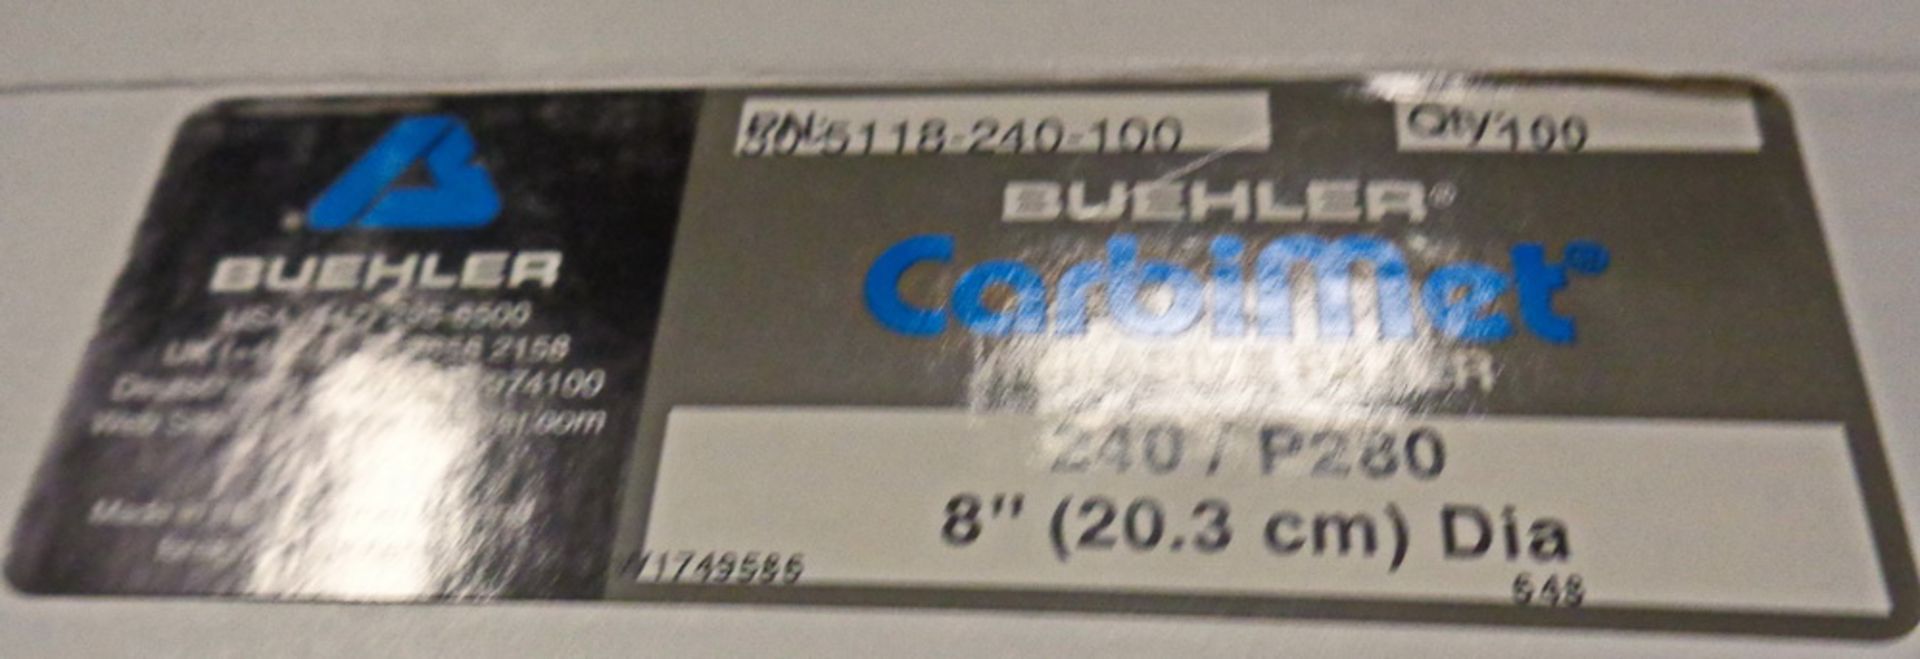 Buehler CarbiMet Silicon Carbide Grinding Paper, 8", Product # 240 [P280] - Image 3 of 3